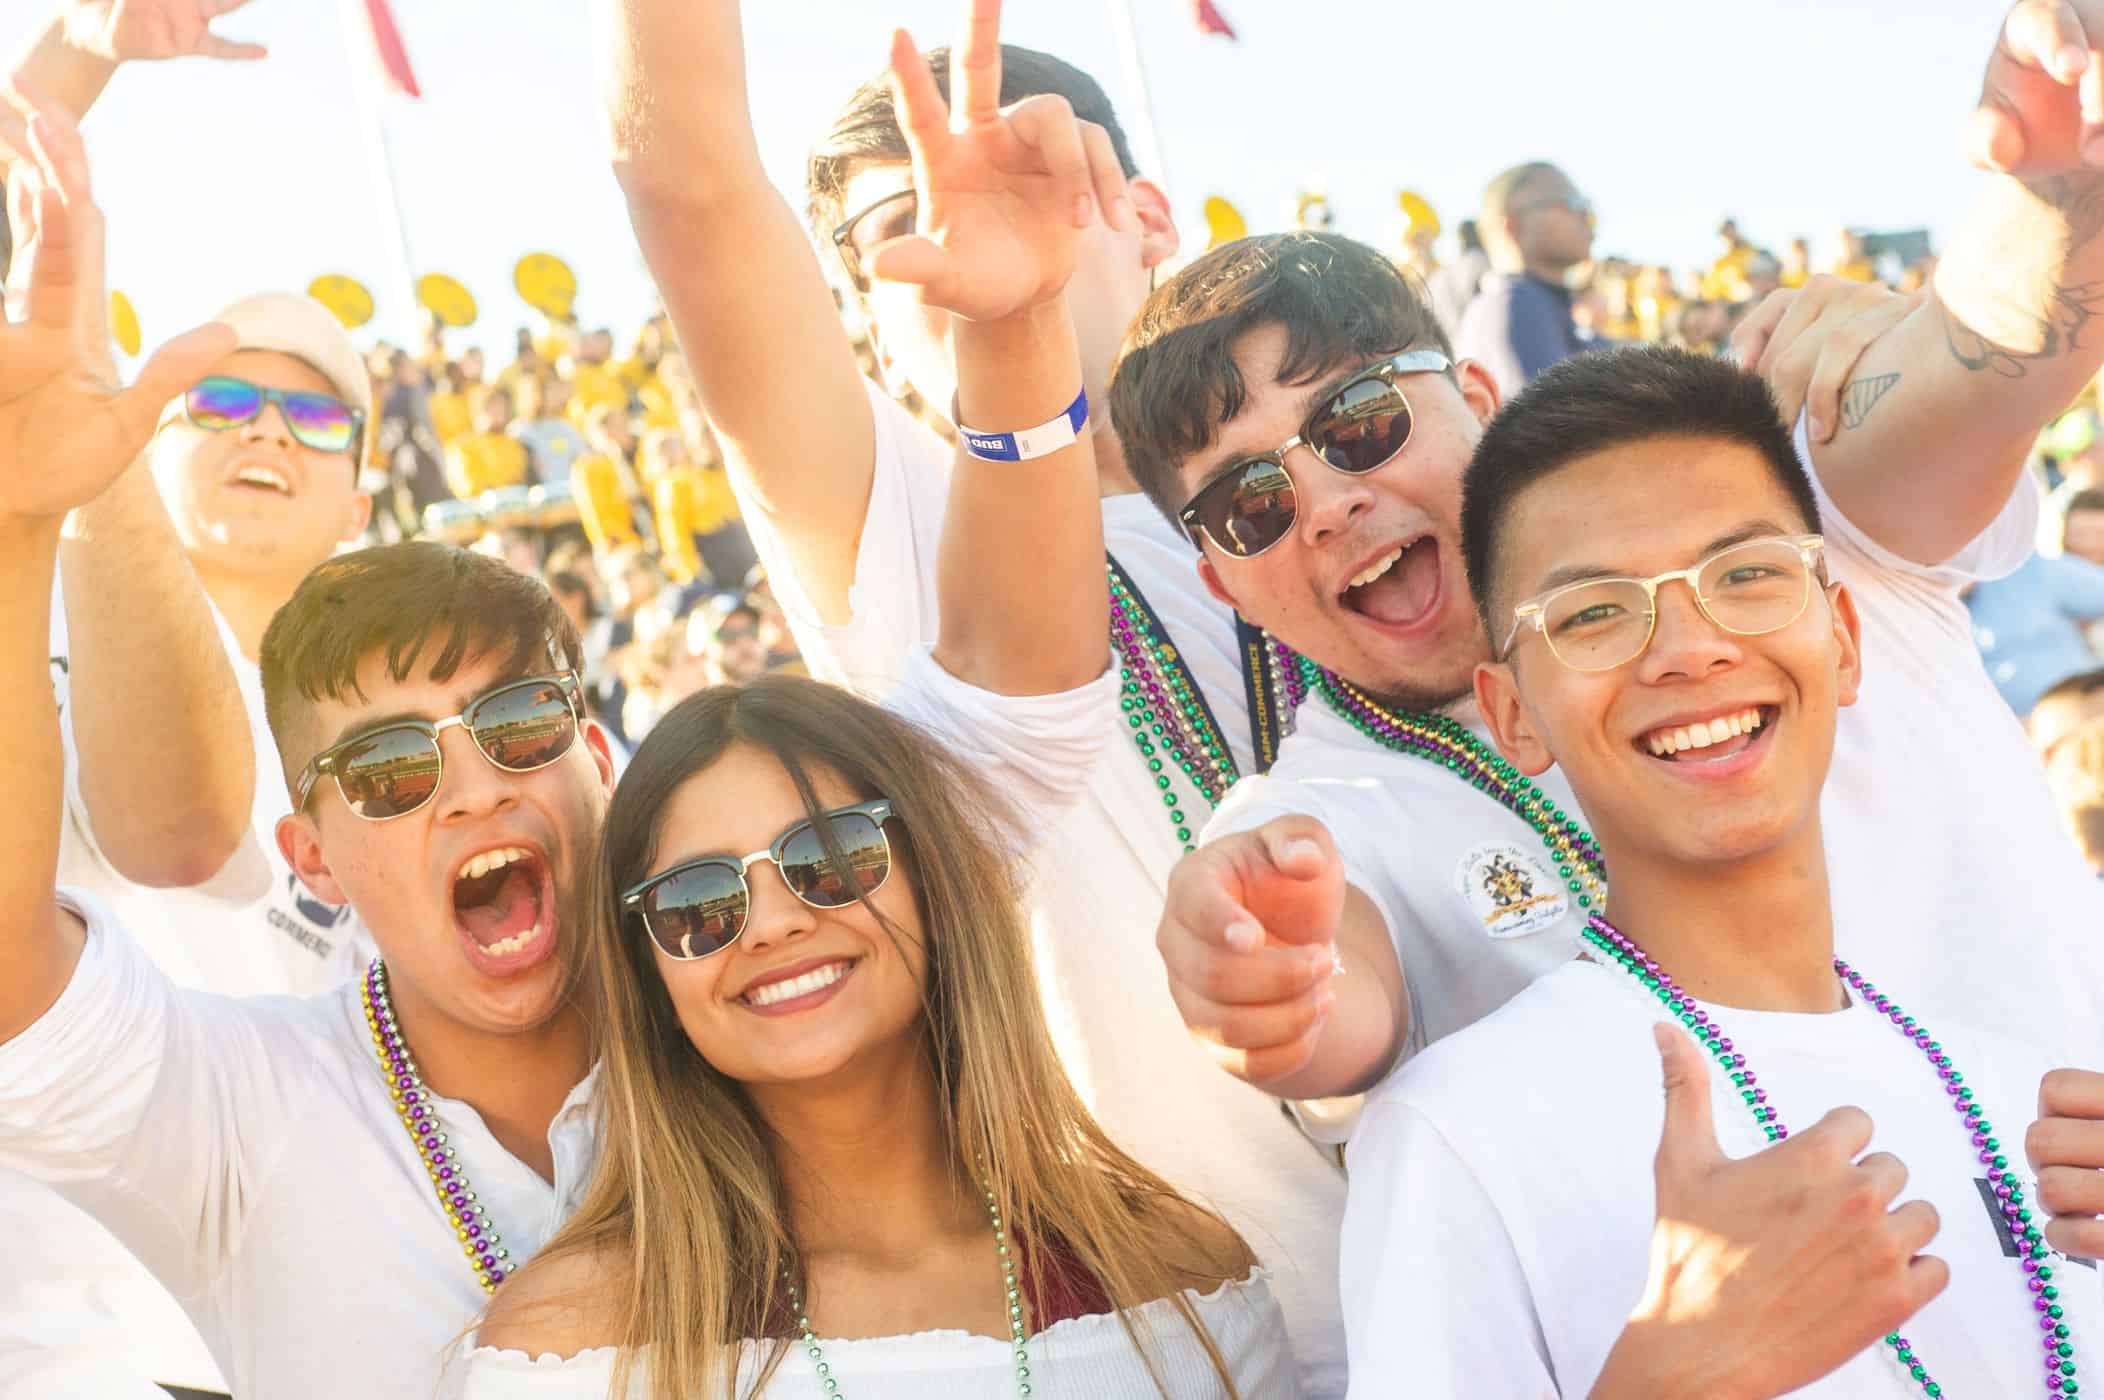 A group of student wearing sunglasses and celebrating homcoming.